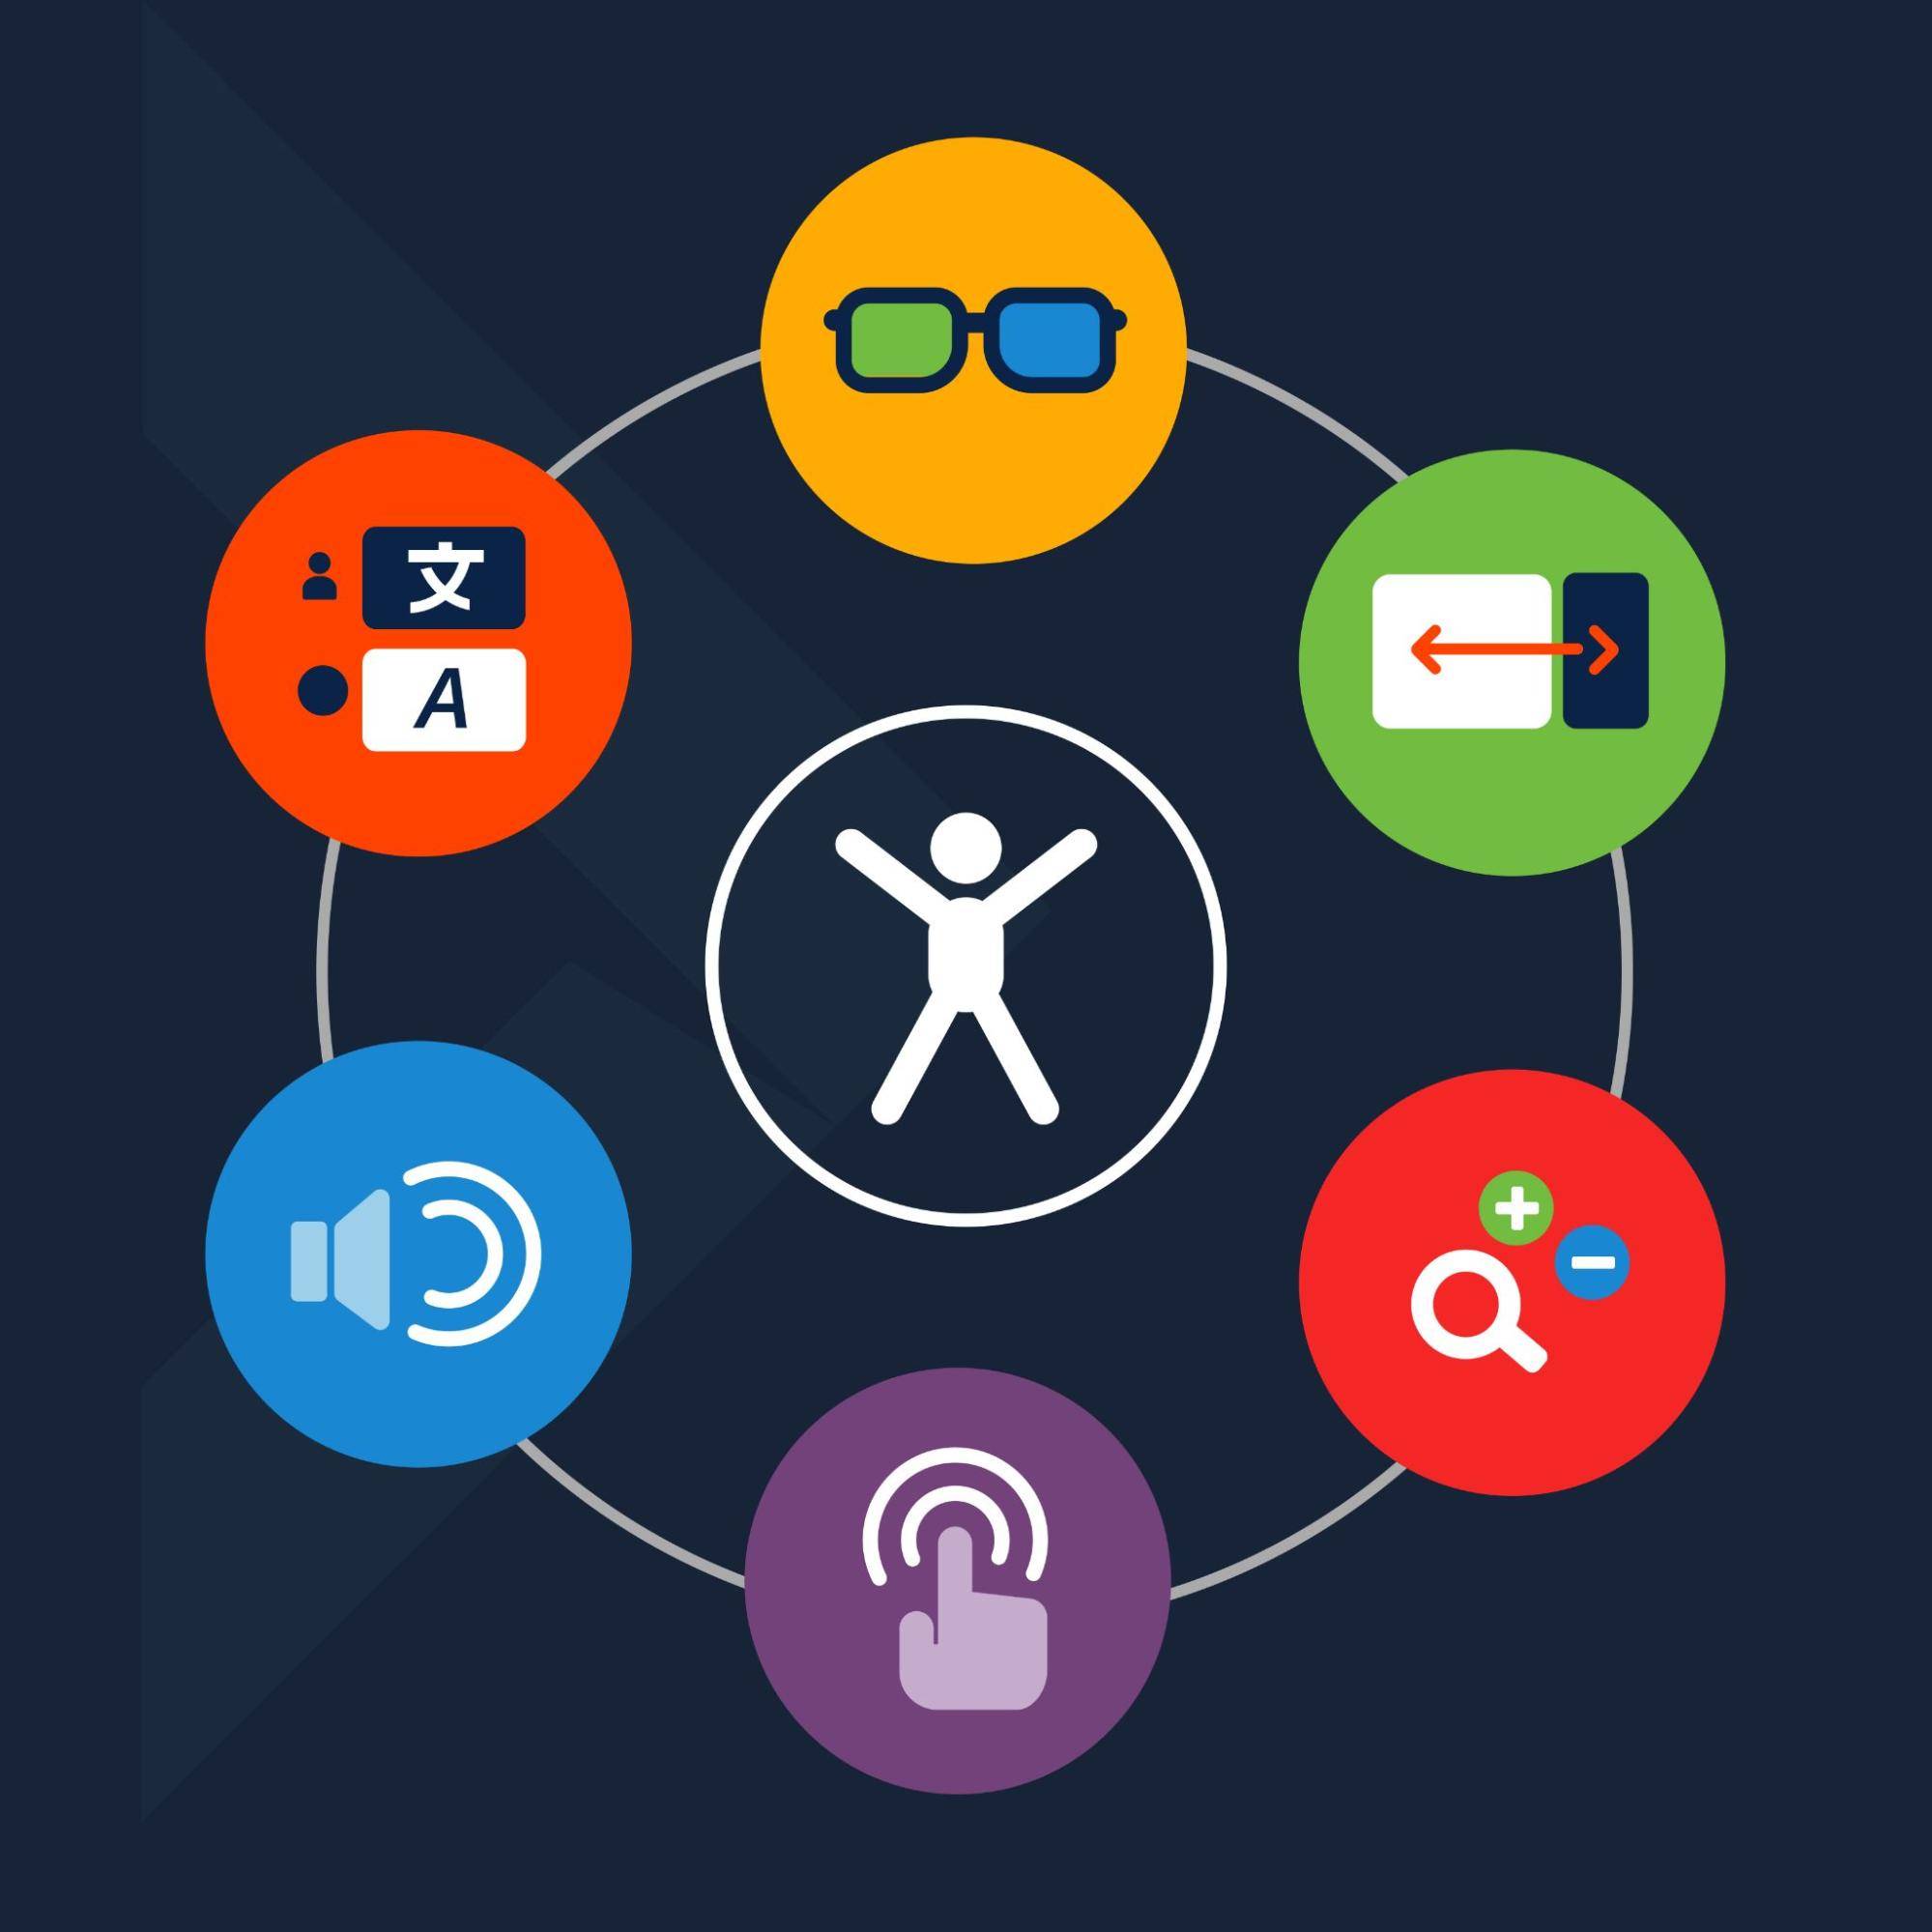 icons representing various aspects of web accessibility